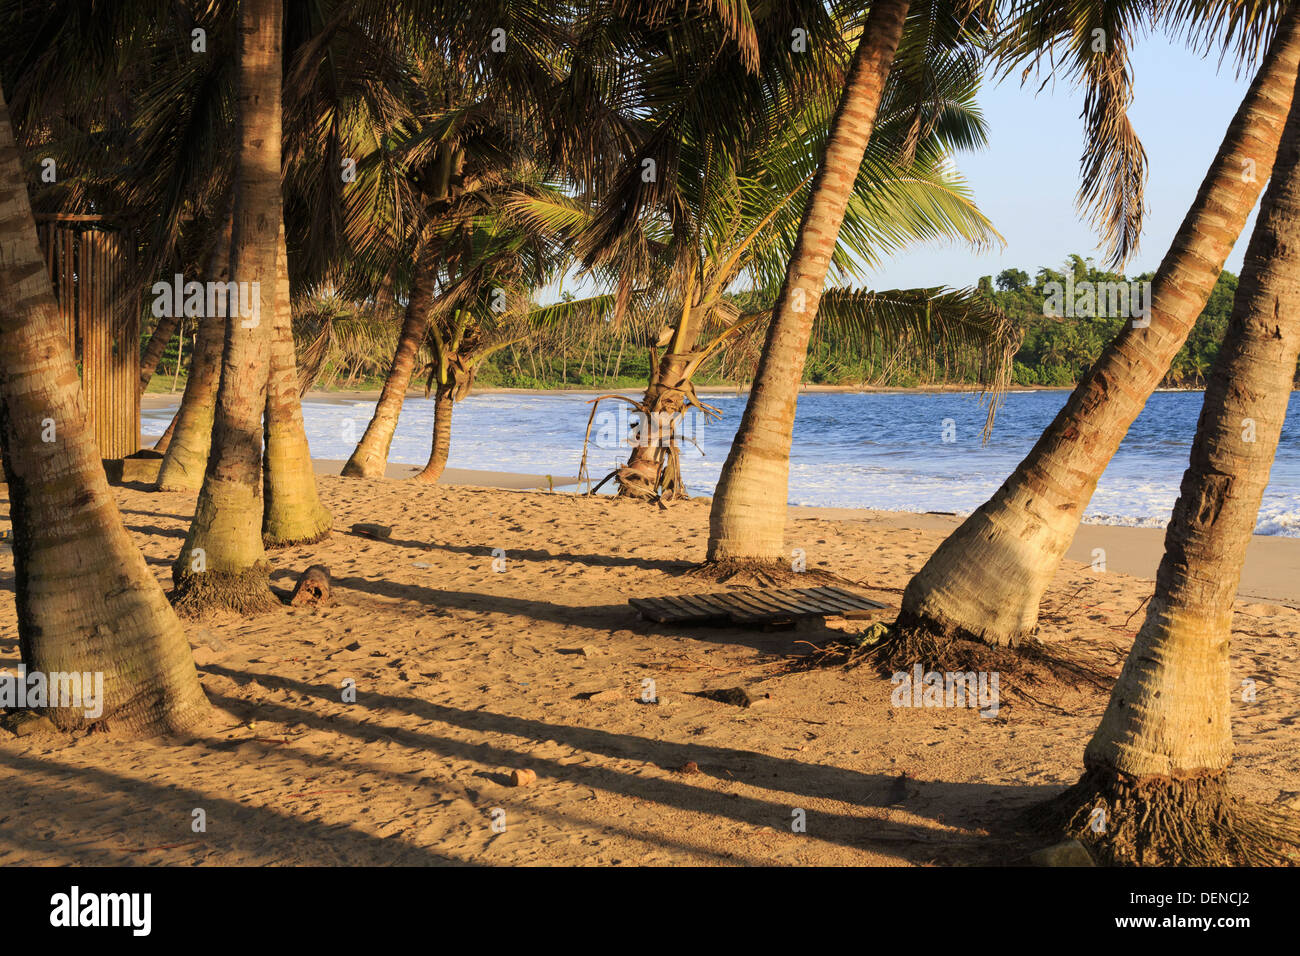 Cluster of palm trees on an African beach Stock Photo